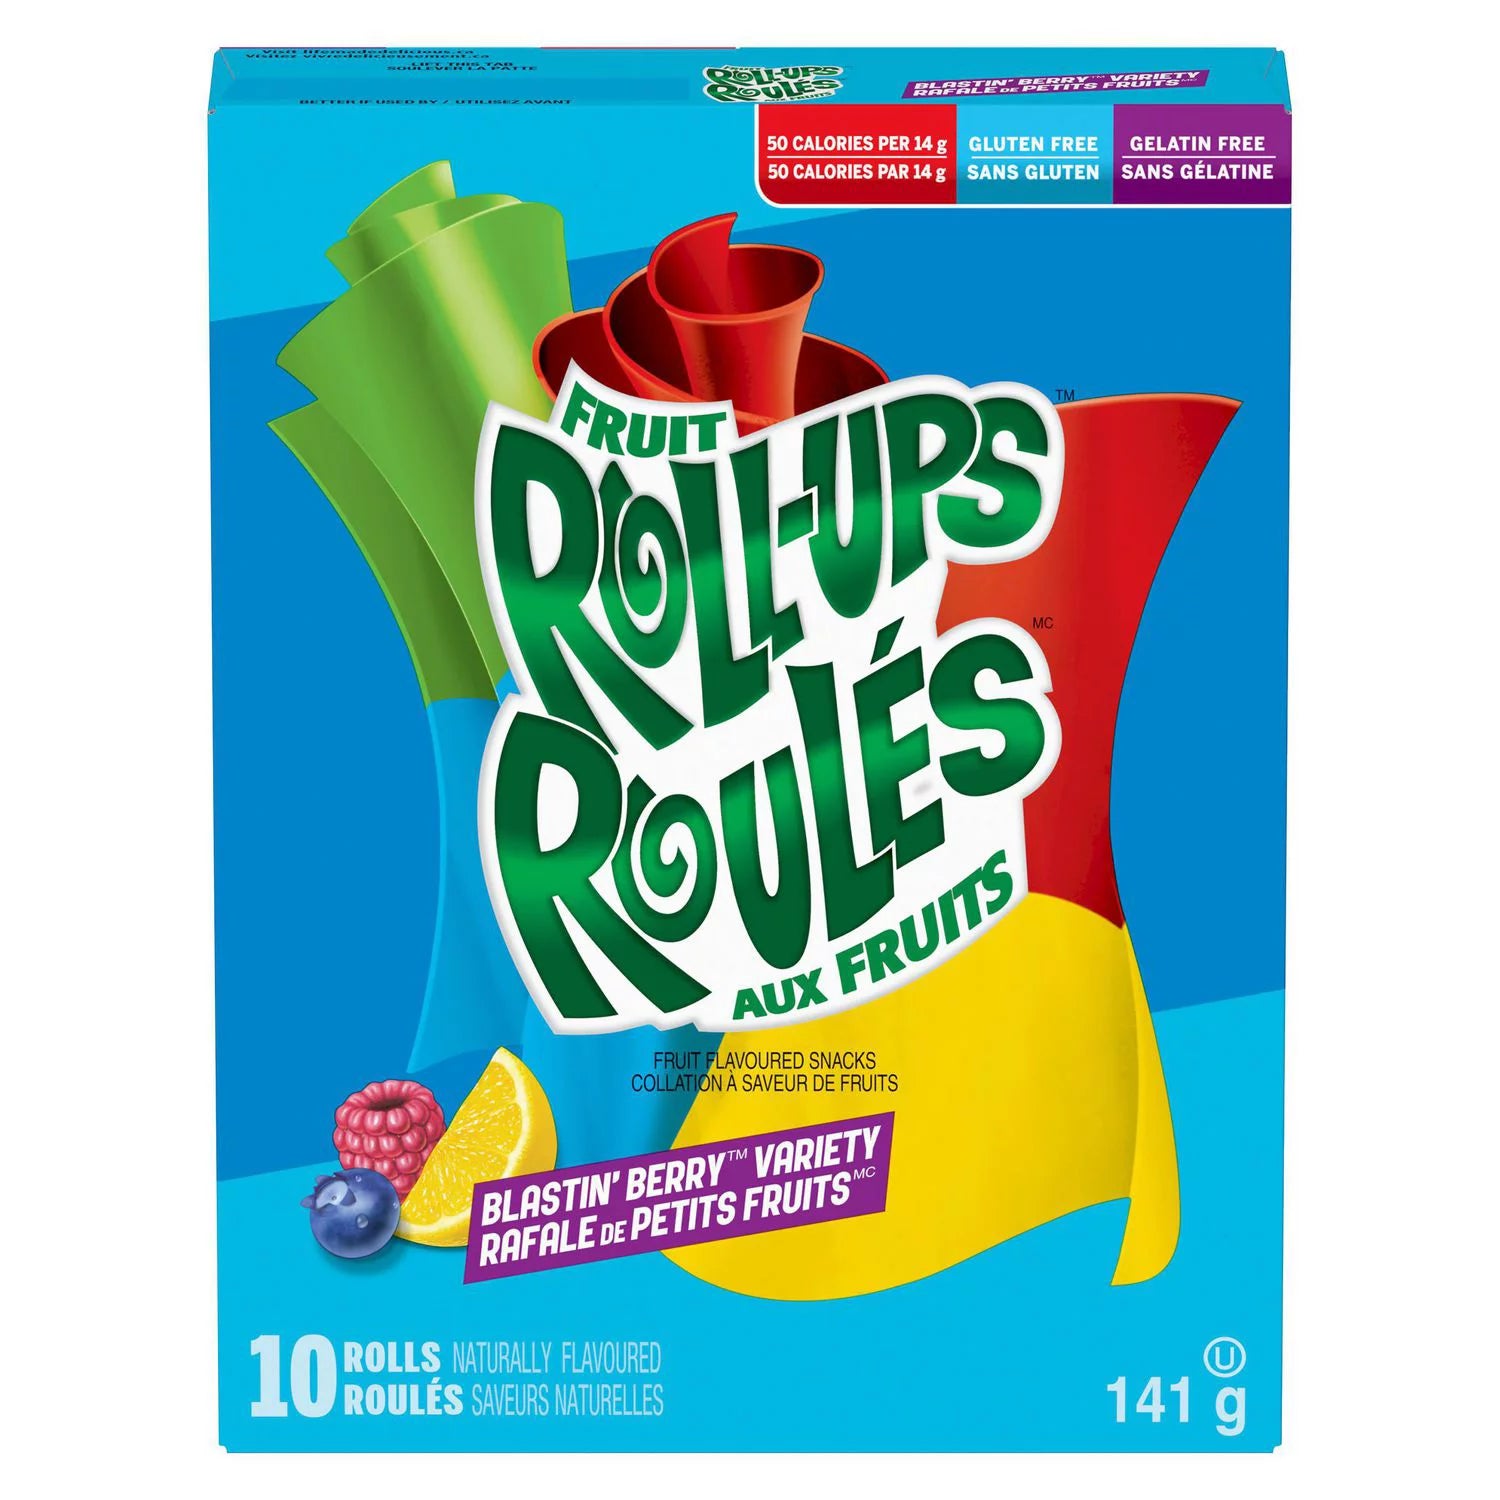 Fruit Roll-Ups Roules